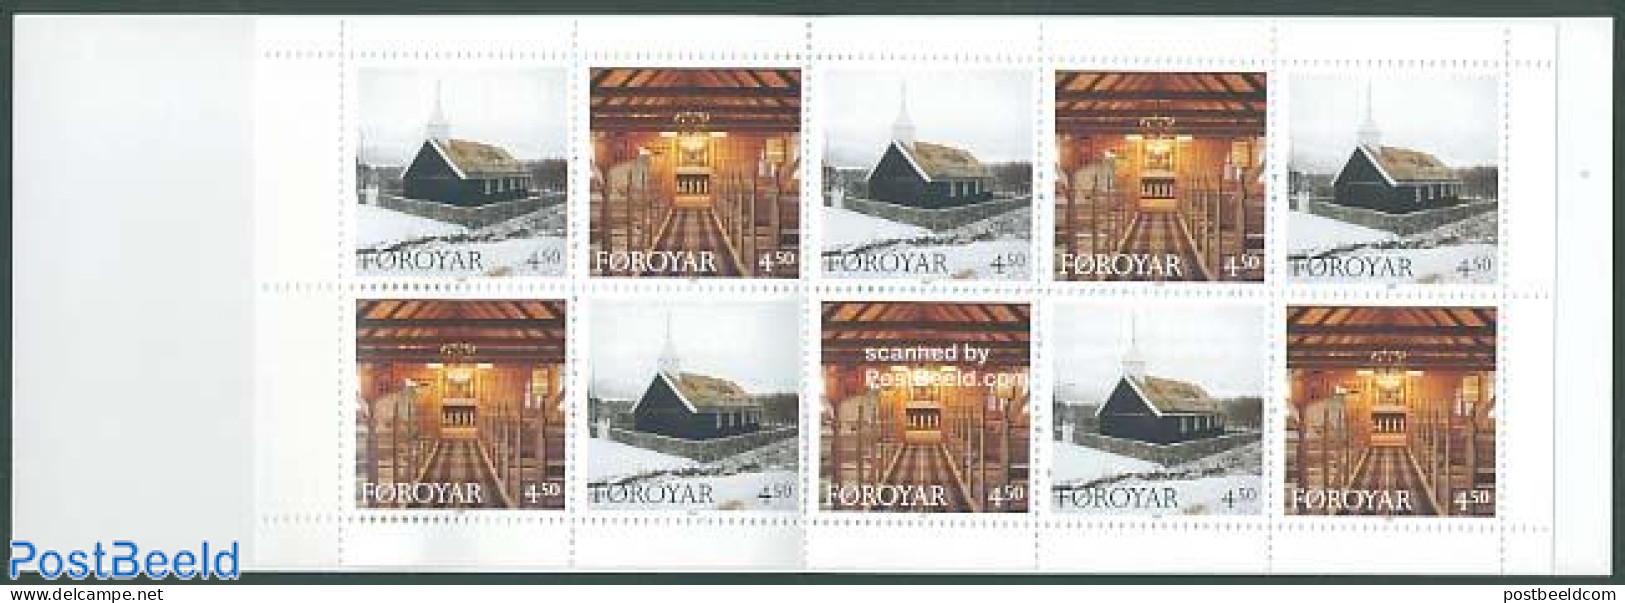 Faroe Islands 1997 Havalik Church Booklet, Mint NH, Religion - Christmas - Churches, Temples, Mosques, Synagogues - St.. - Christmas